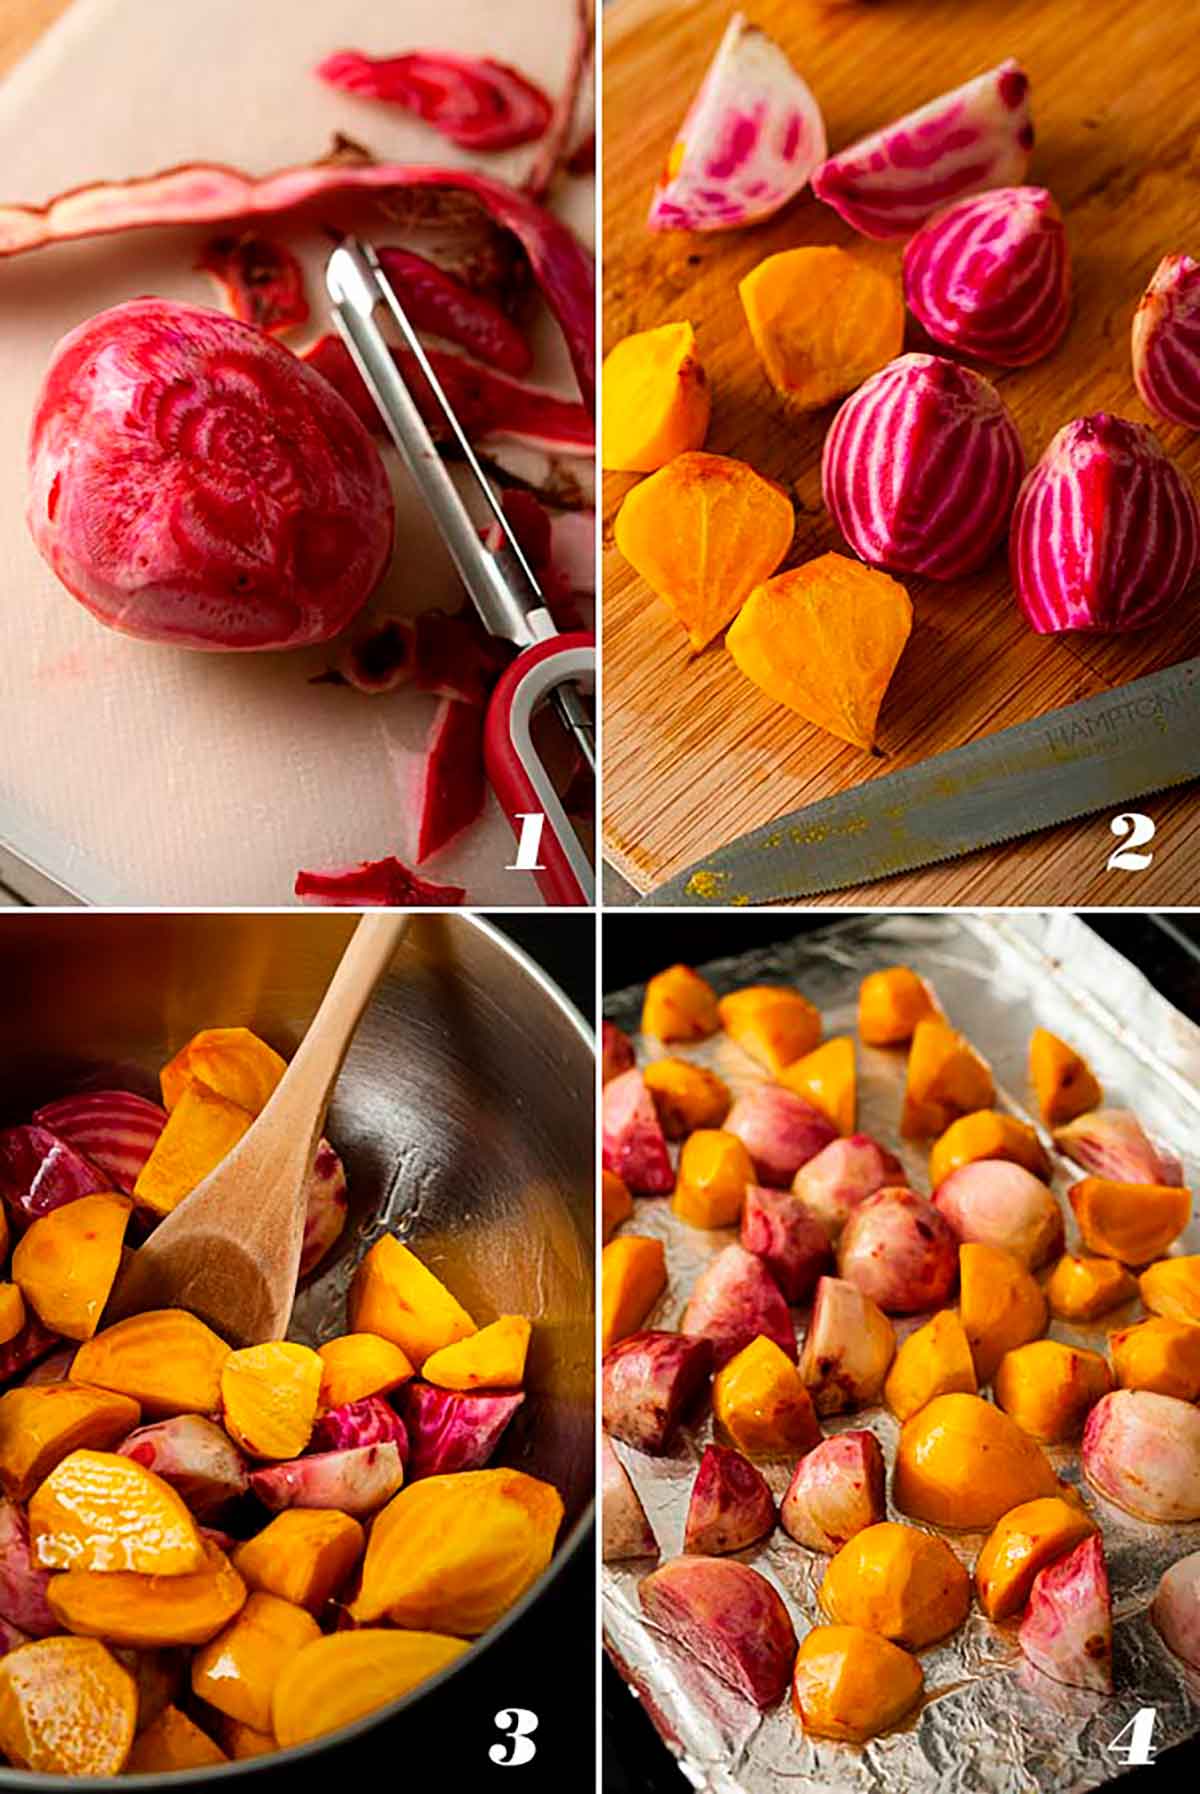 A collage of 4 numbered images showing how to prepare beets for roasting.